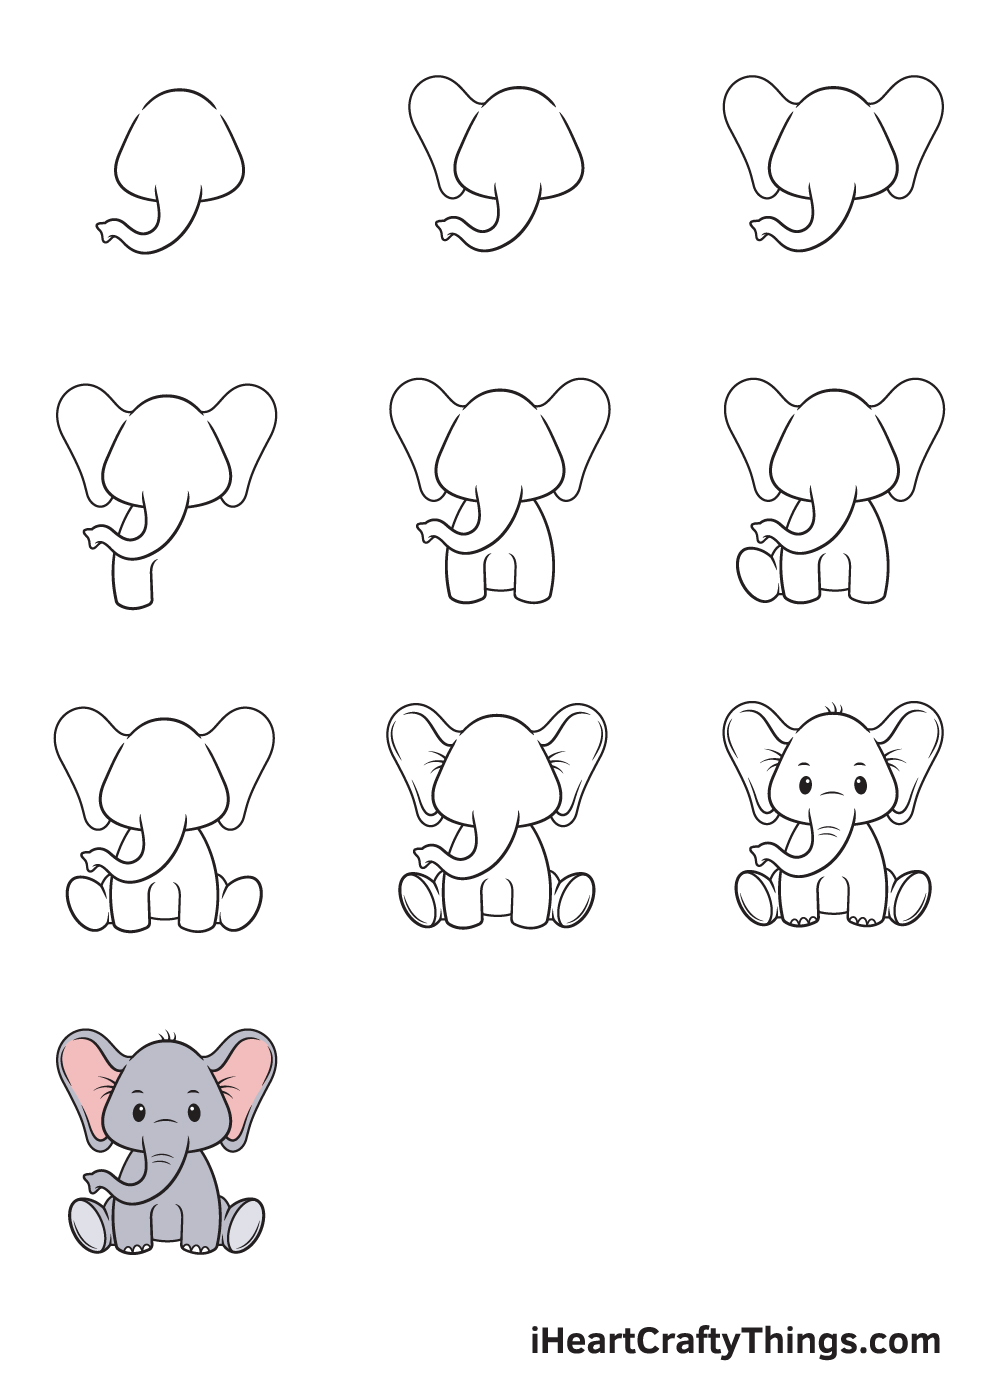 Drawing Elephant in 9 Easy Steps